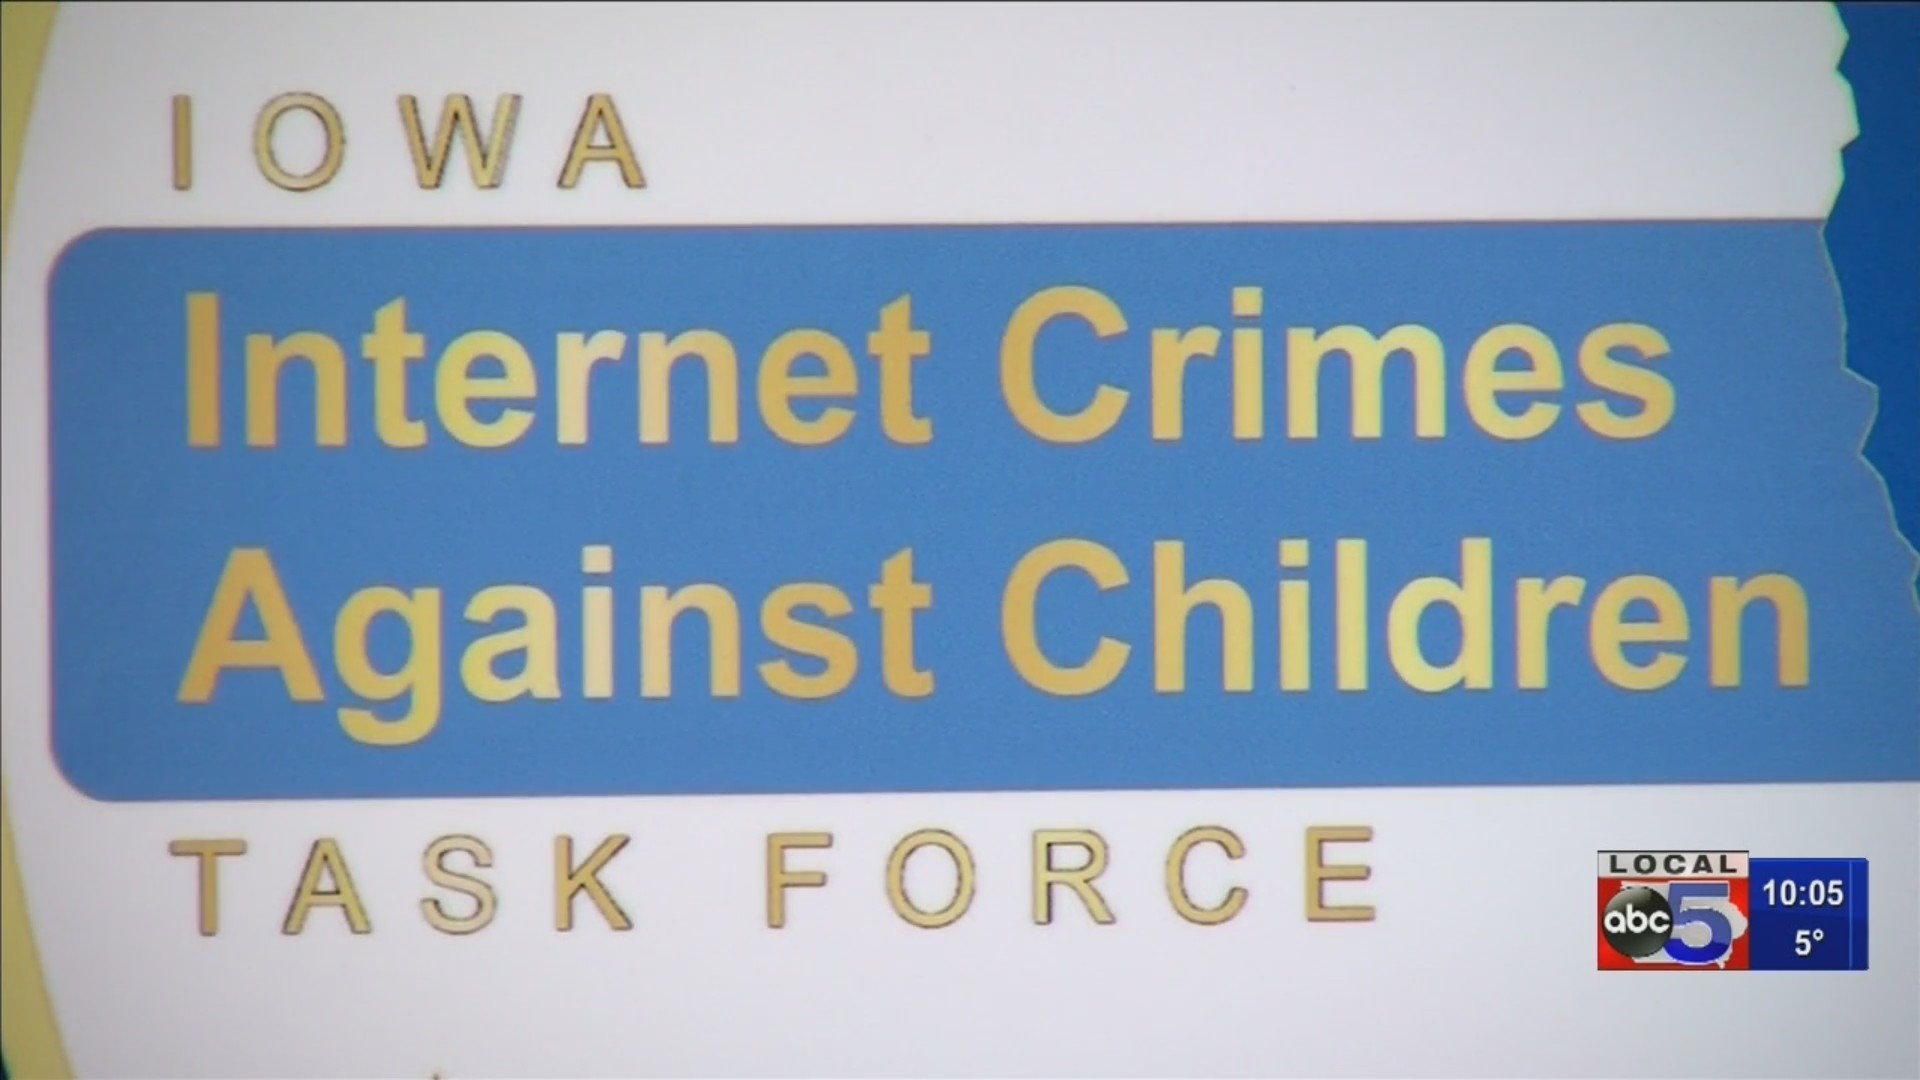 DCI working to stop Iowa cyber crimes against children